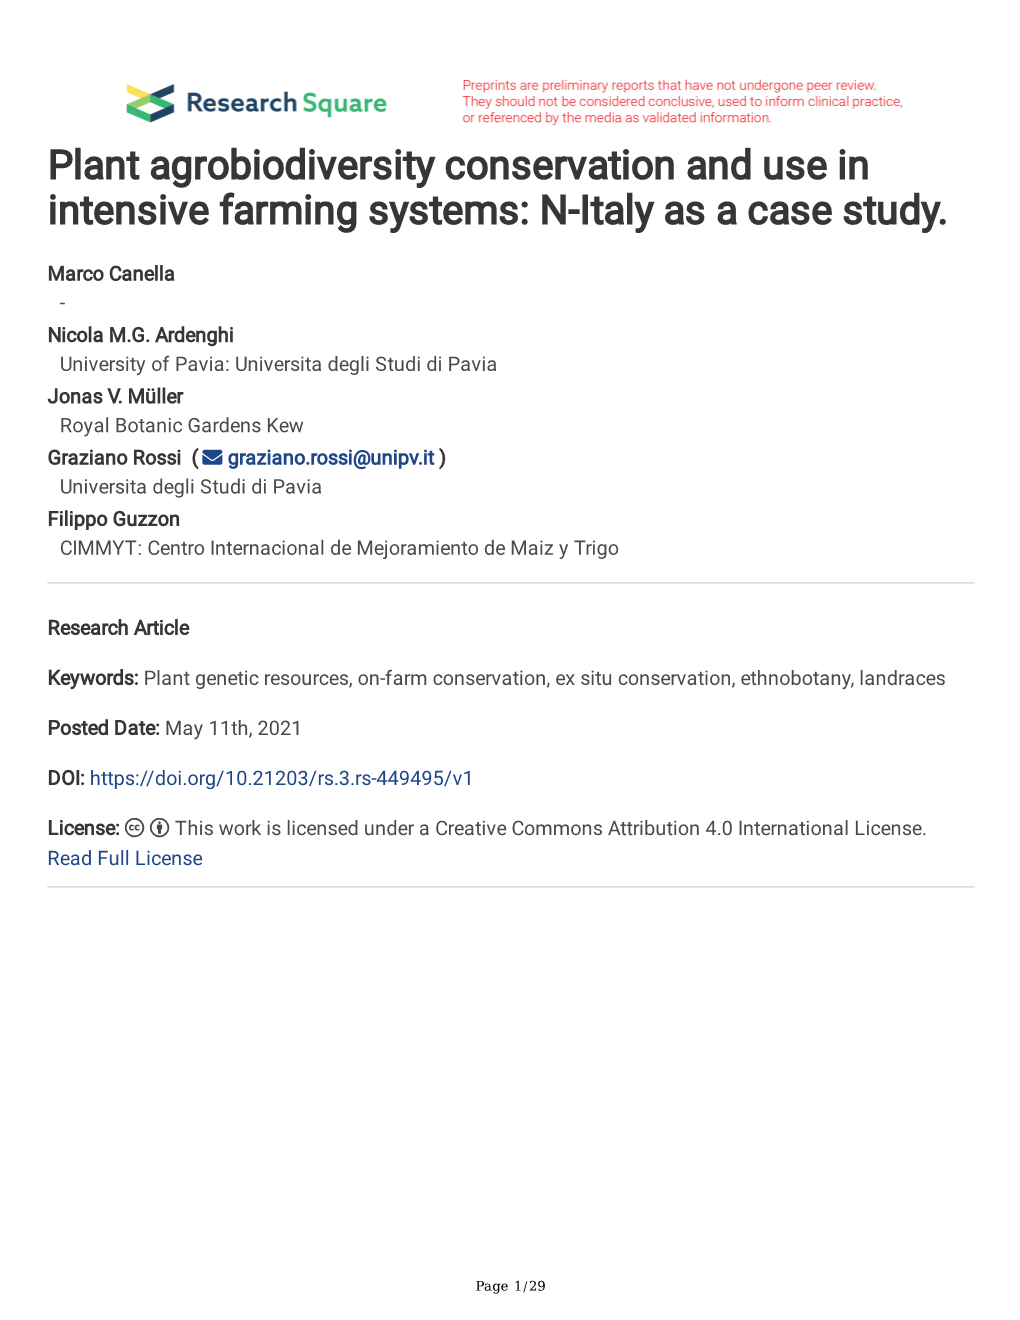 Plant Agrobiodiversity Conservation and Use in Intensive Farming Systems: N-Italy As a Case Study